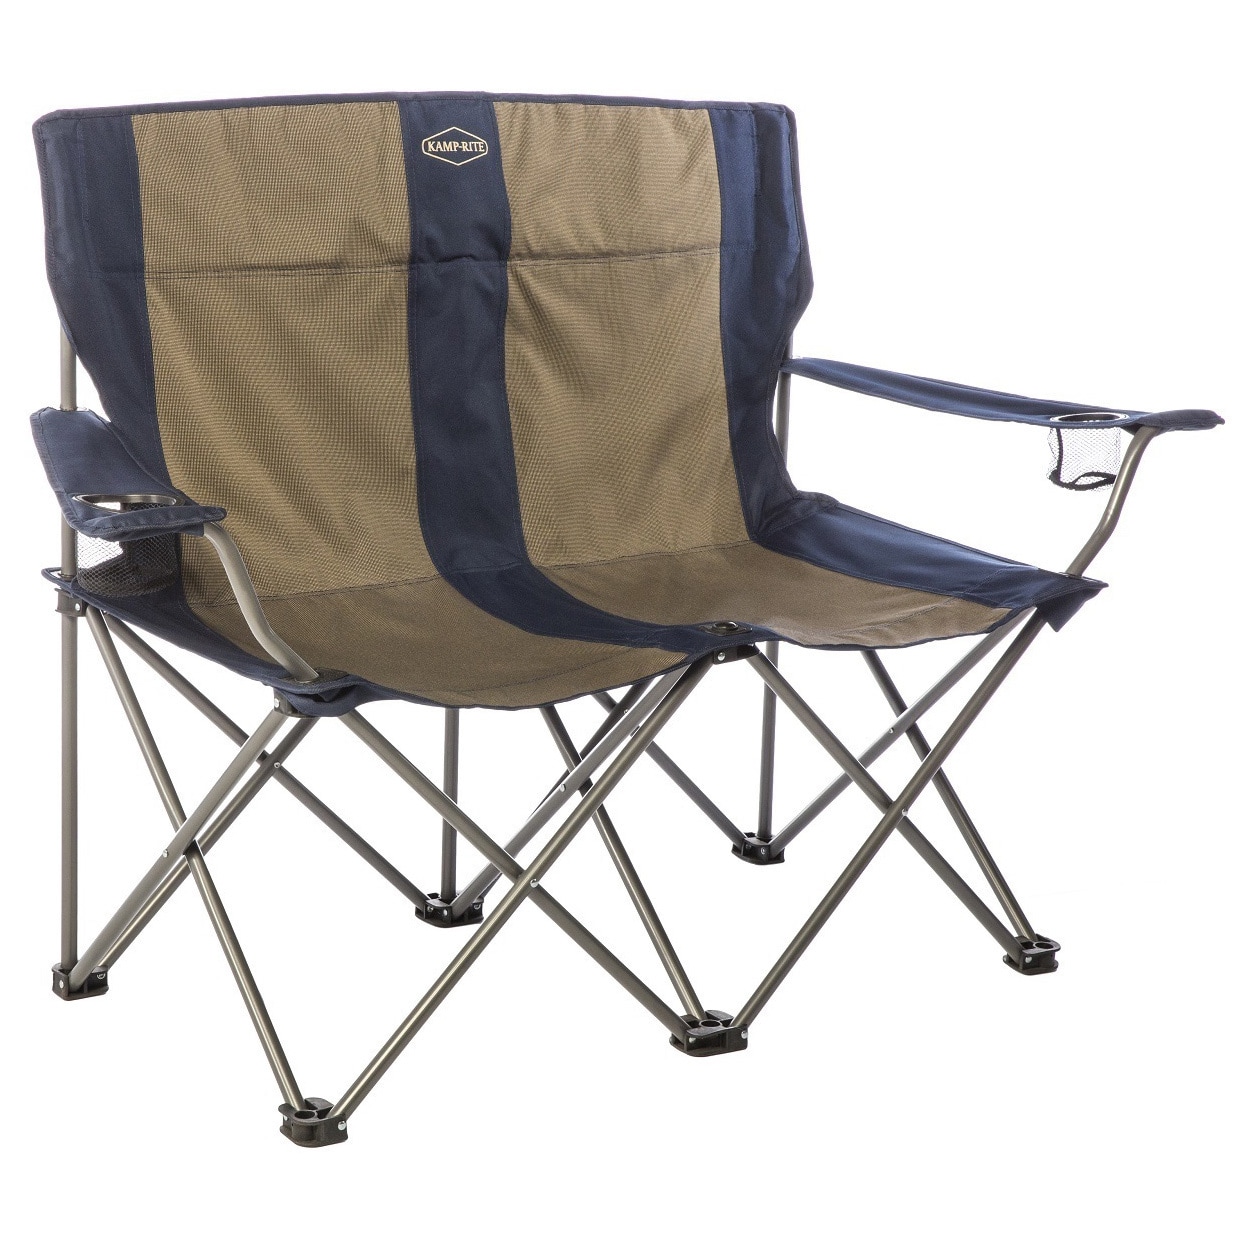 kamprite double folding chair with arm rests